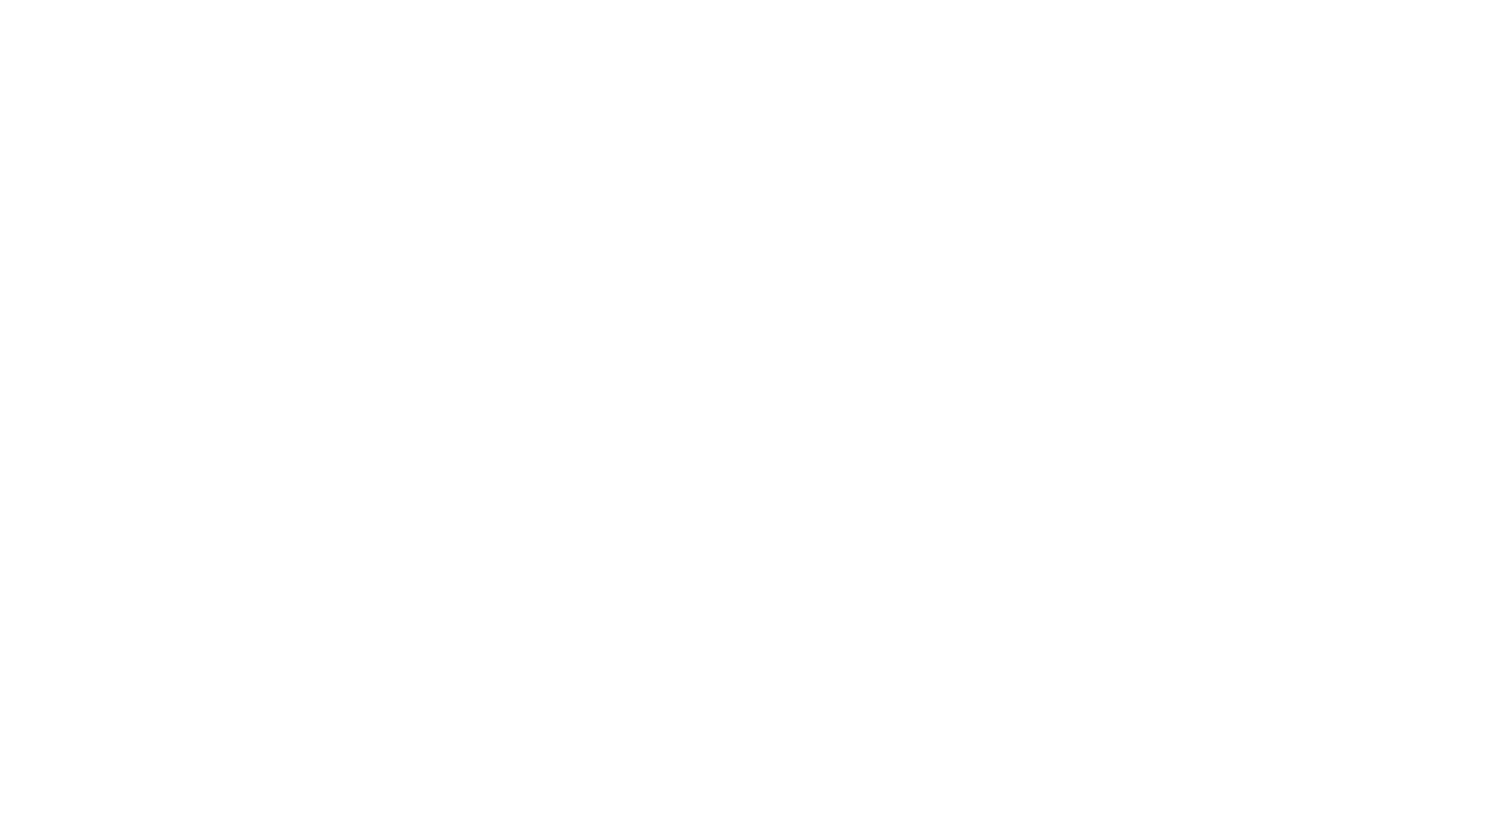 Humentum_notag_new 1.png